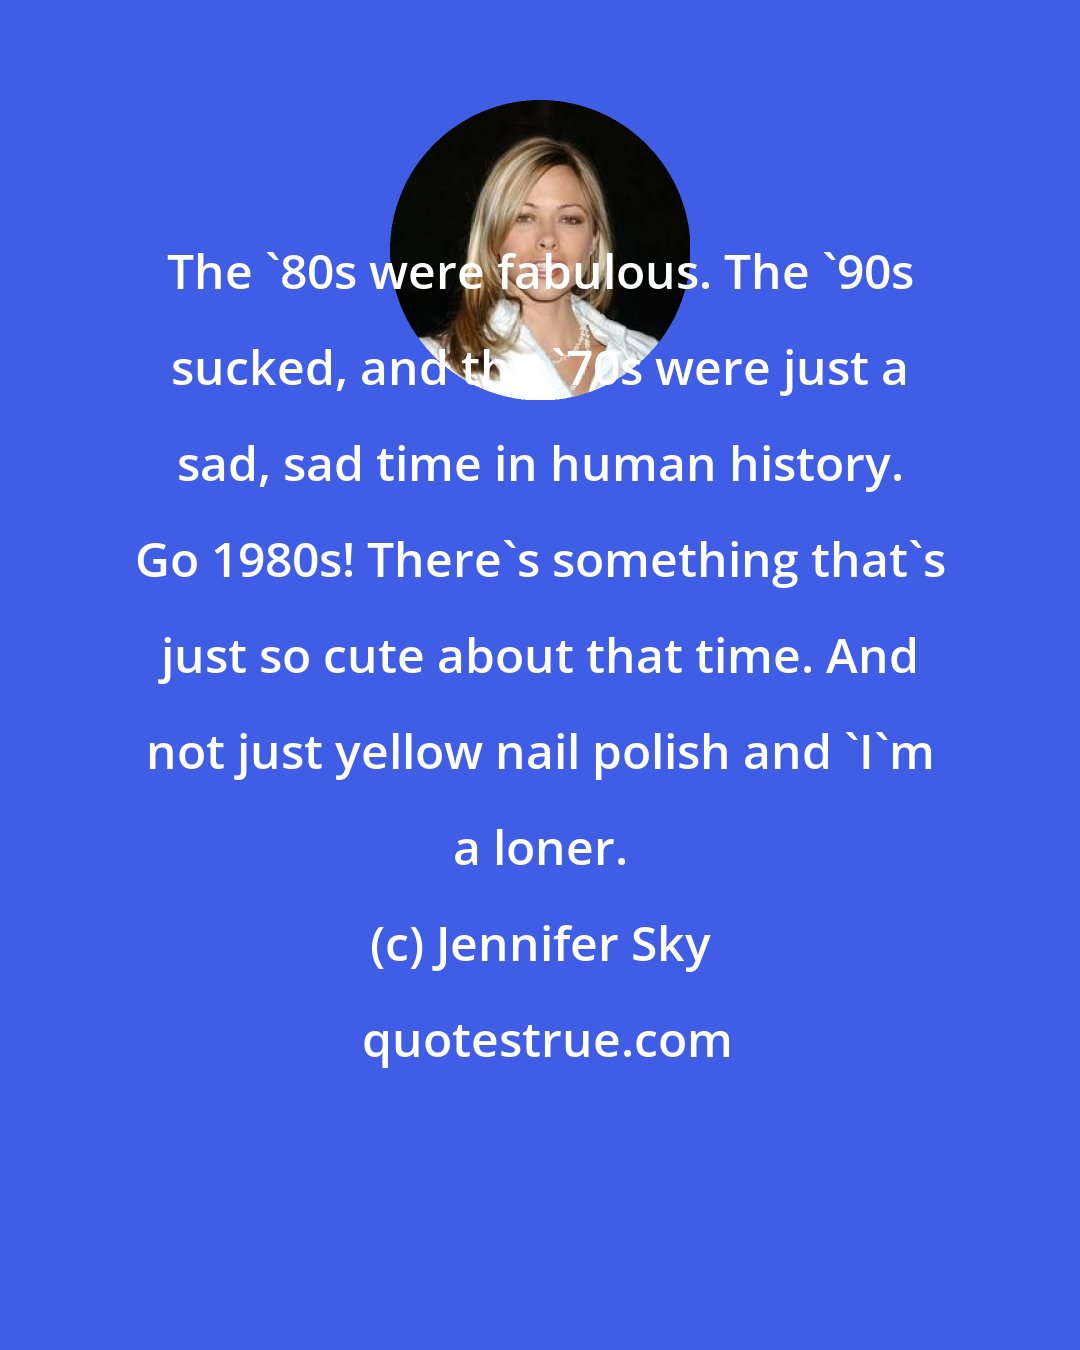 Jennifer Sky: The '80s were fabulous. The '90s sucked, and the '70s were just a sad, sad time in human history. Go 1980s! There's something that's just so cute about that time. And not just yellow nail polish and 'I'm a loner.